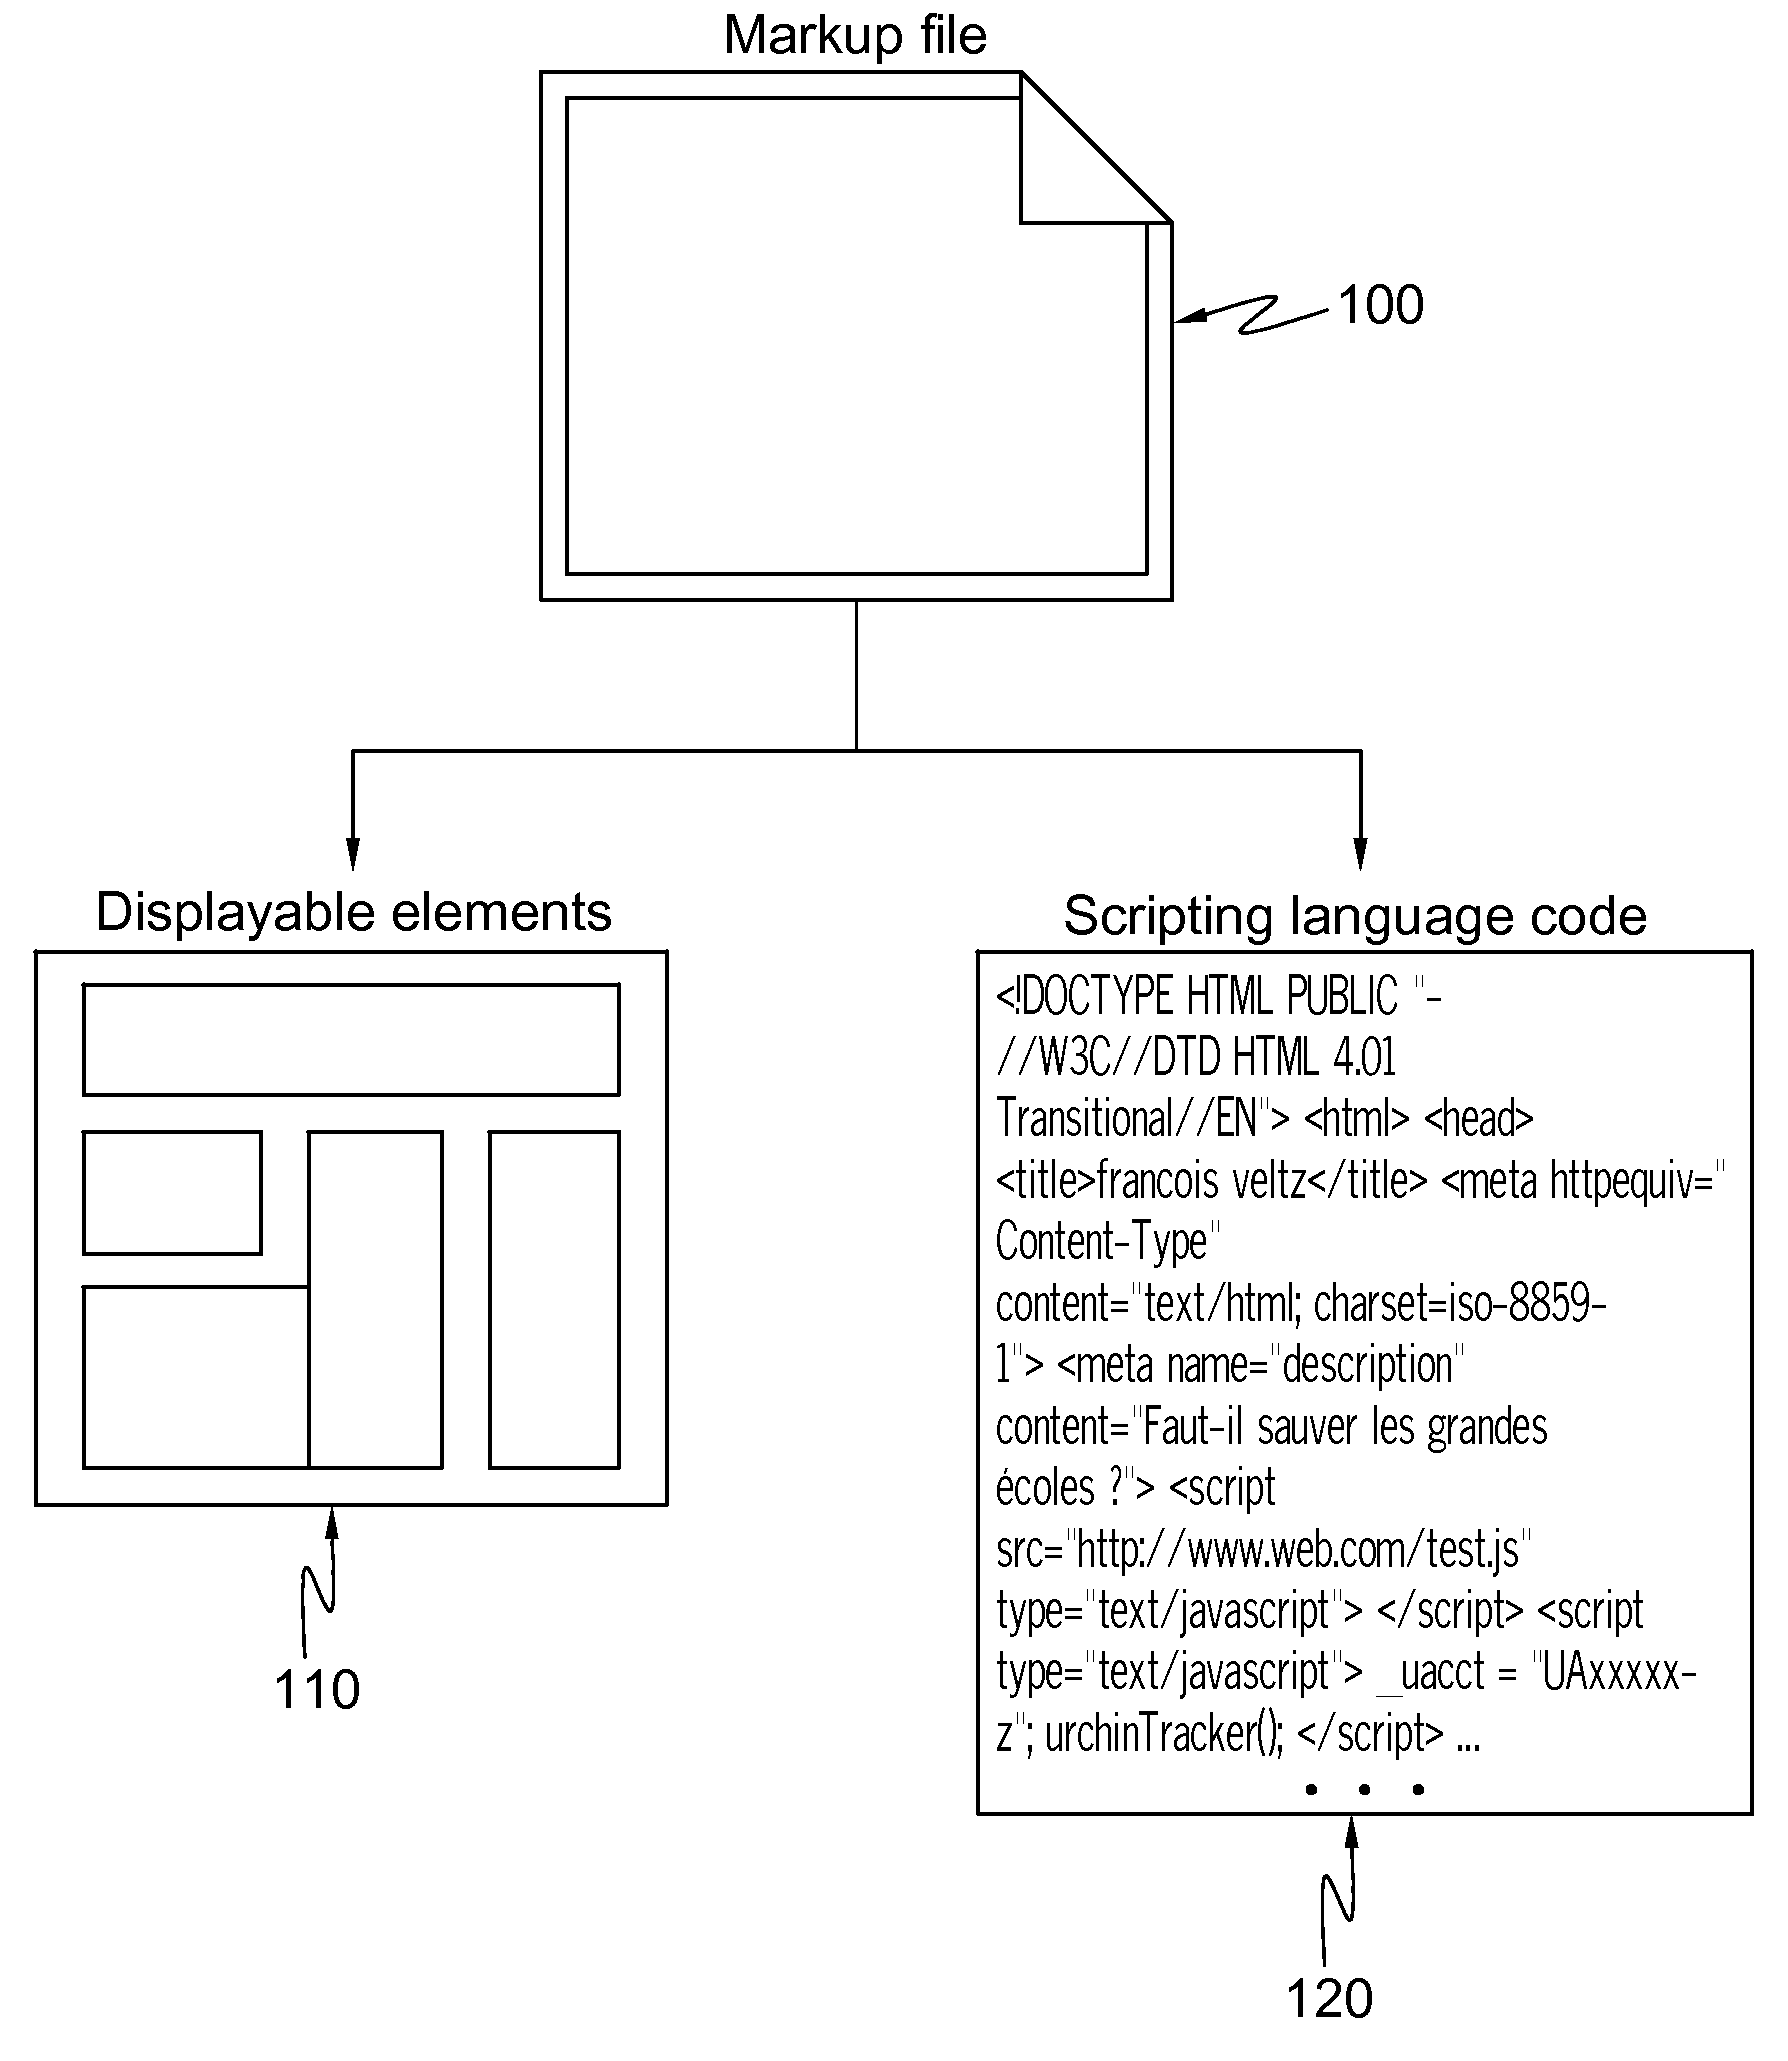 Method and system to secure the display of a particular element of a markup file